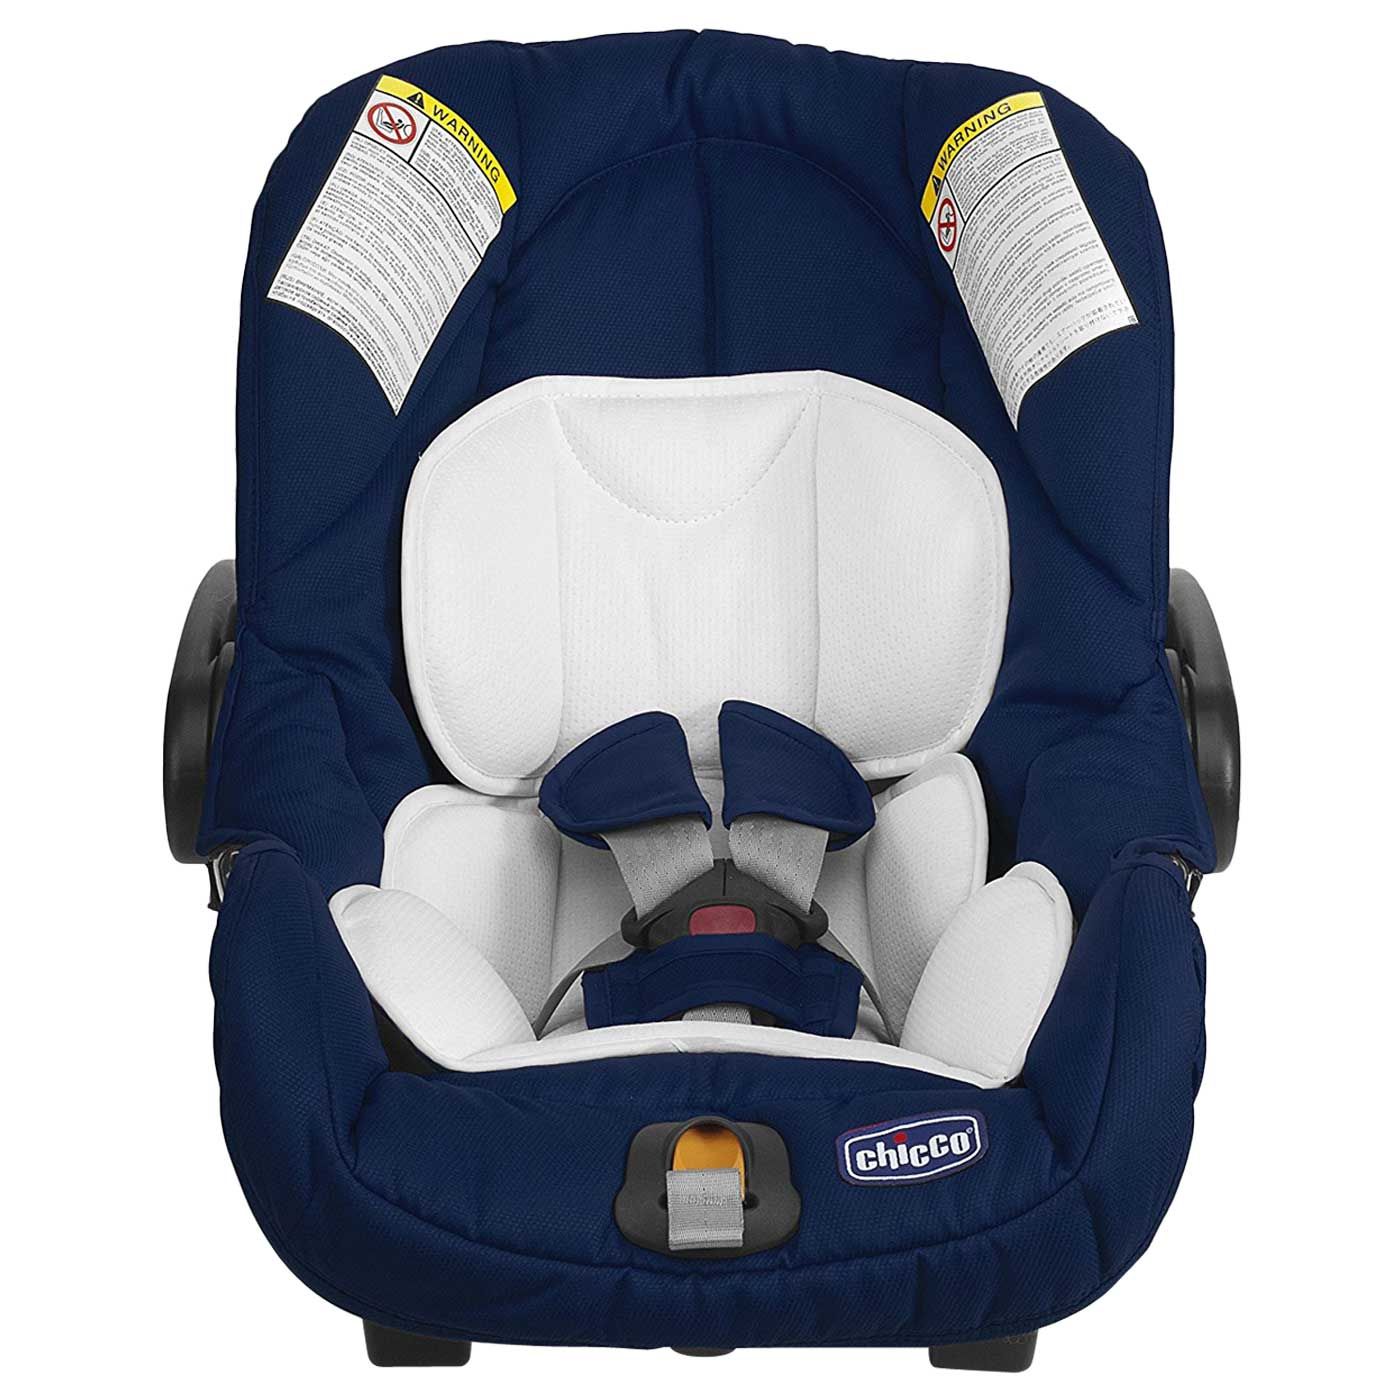 Chicco Keyfit Carseat - Blue - 1